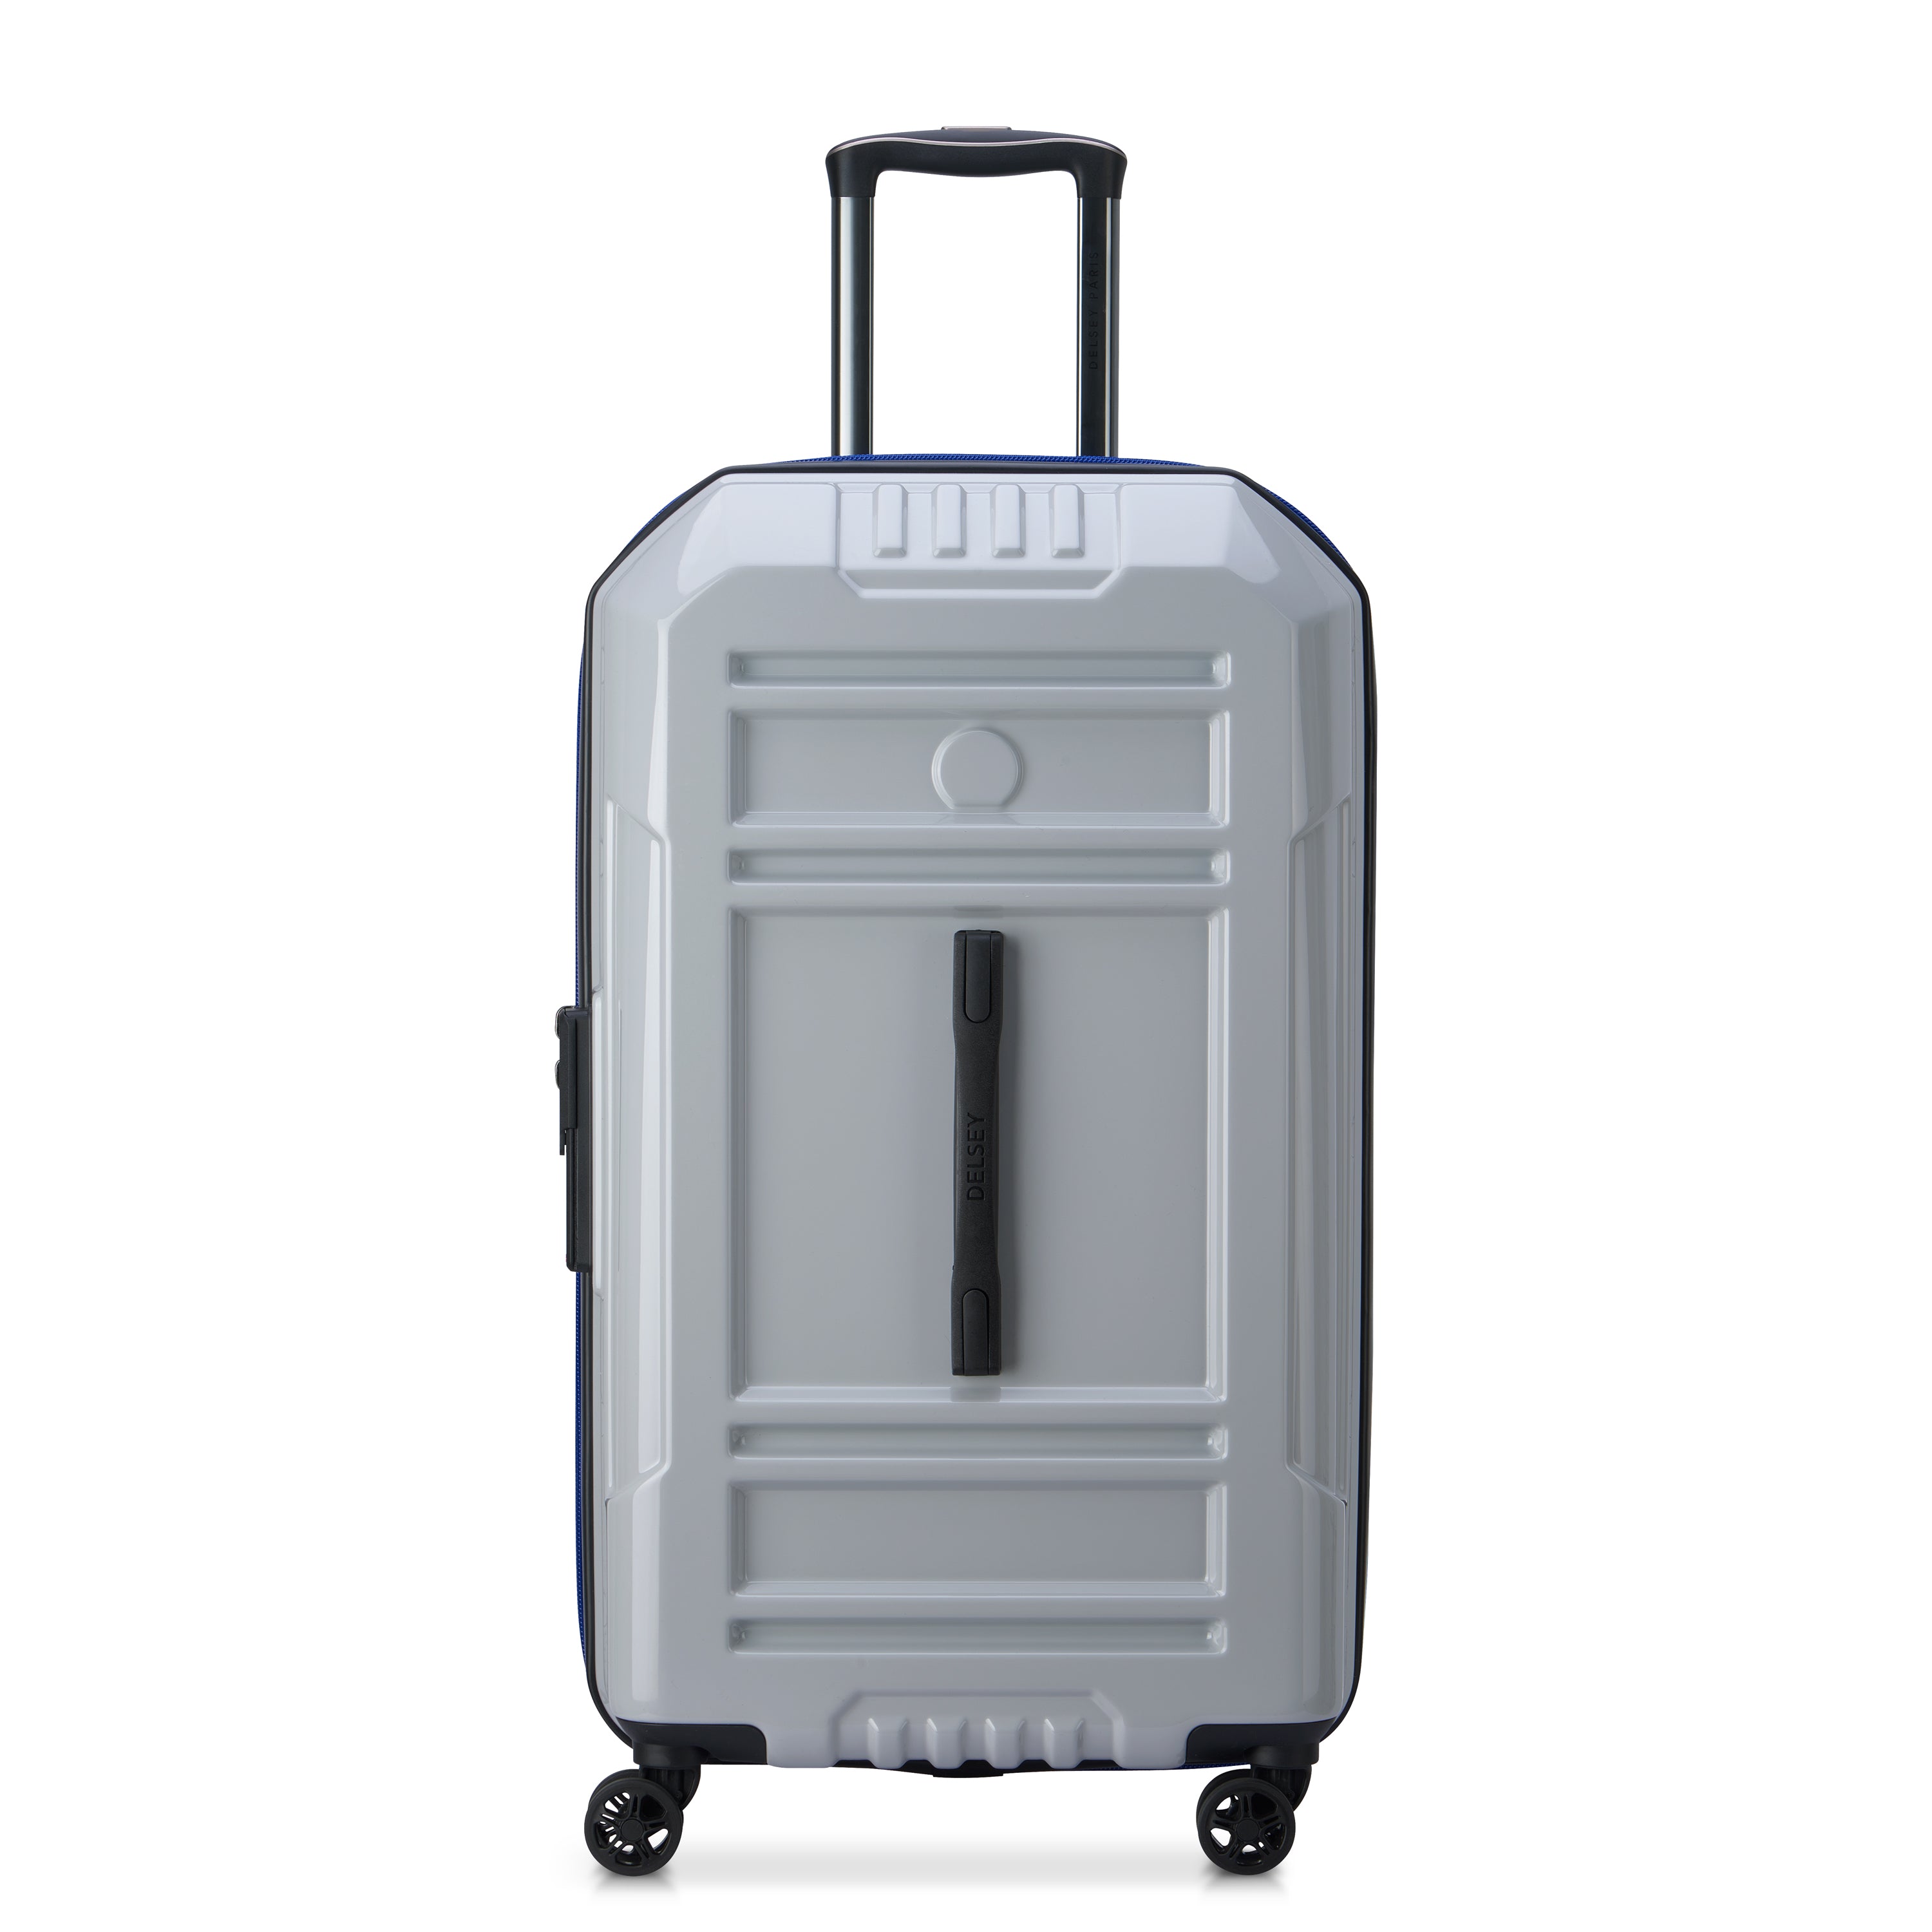 Delsey Rempart 73cm Hardcase Expandable 4 Double Wheel Flex Check-In  Luggage Trolley Case  Trunk Storm Grey  Glossy - 218181821